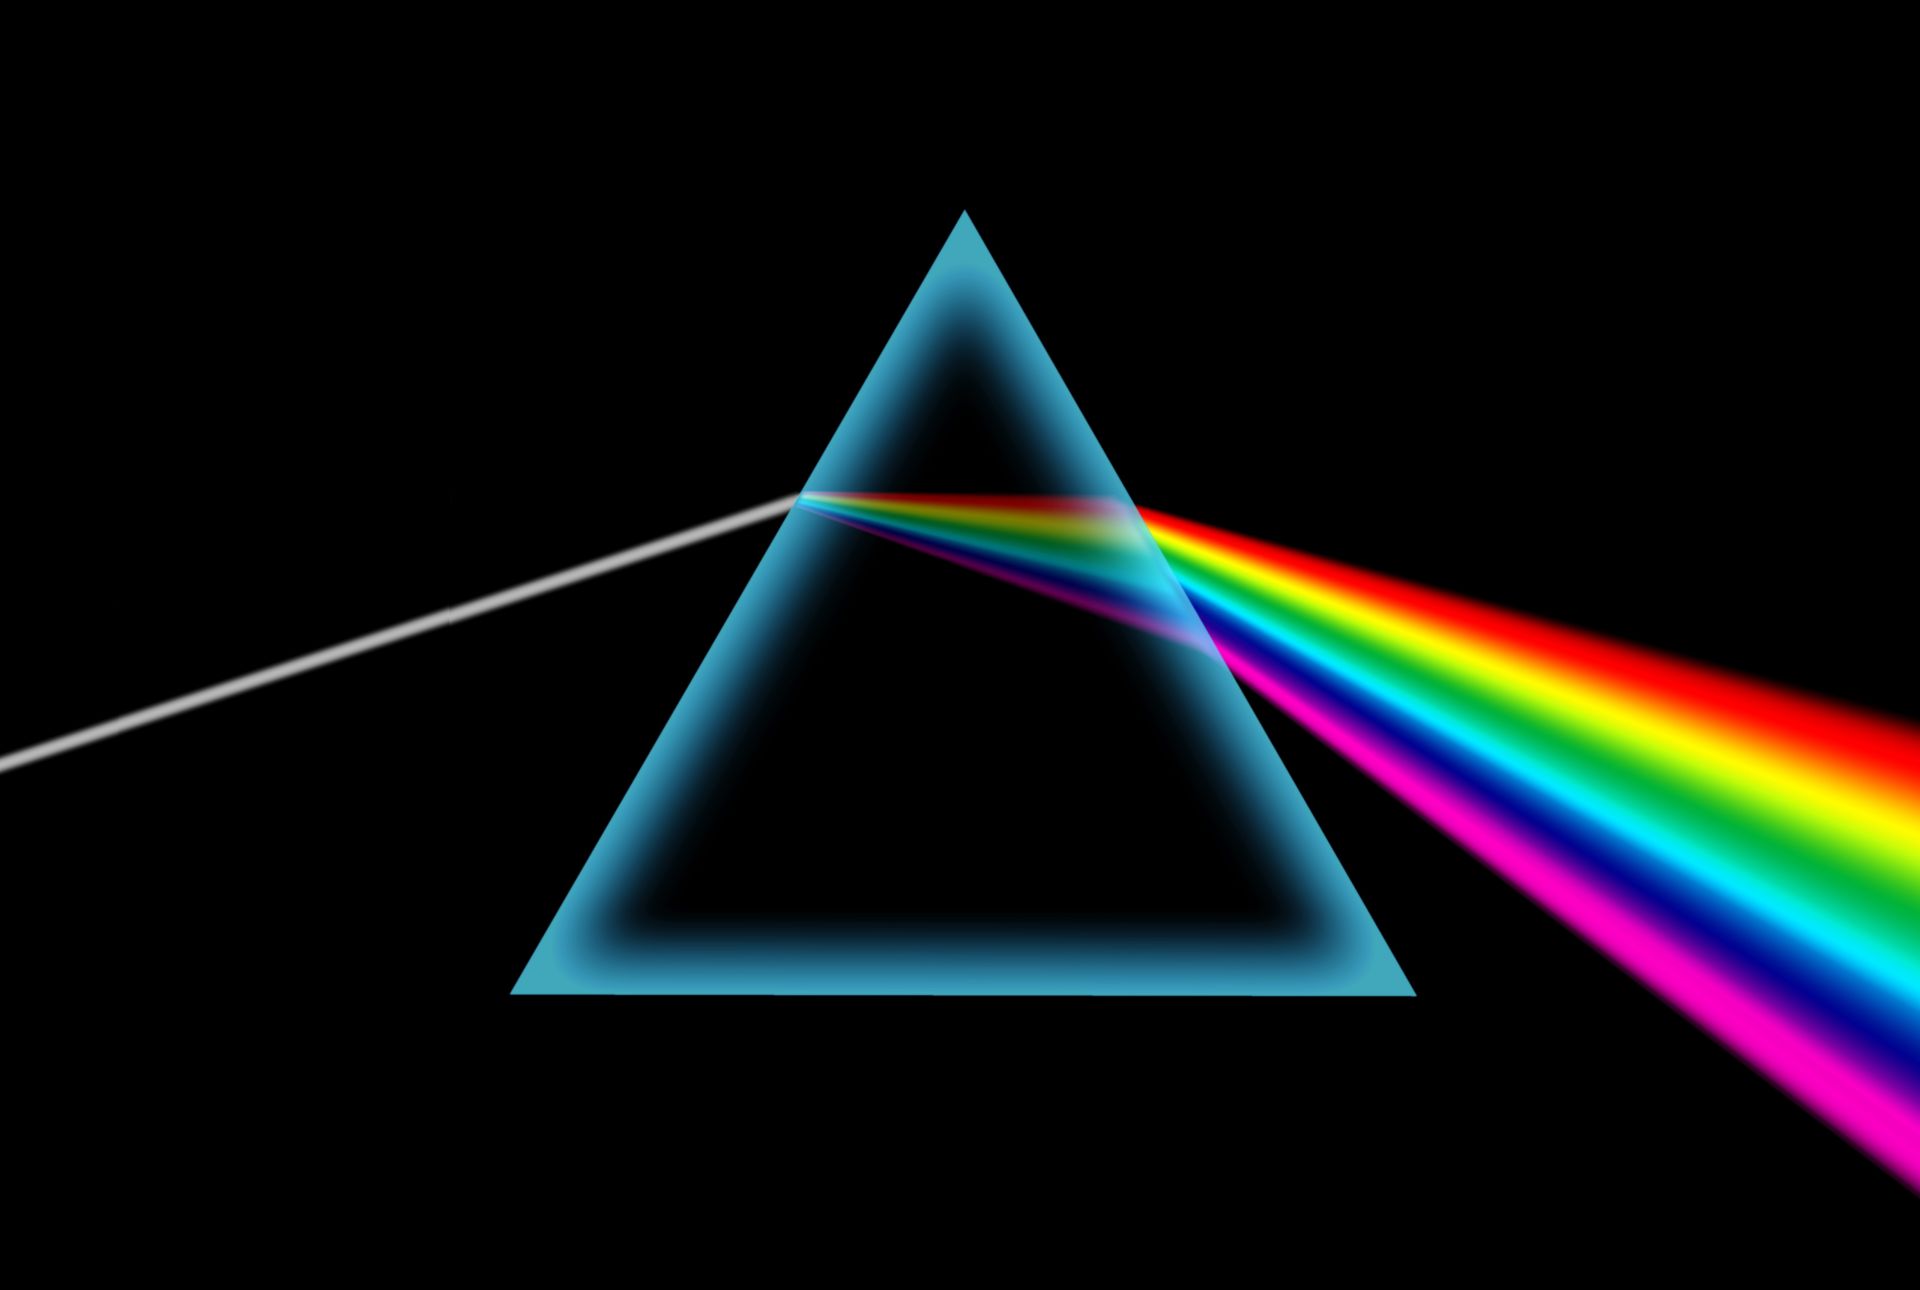 Rendering of prism on black background showing how a rainbow light refracts when white light hits the prism